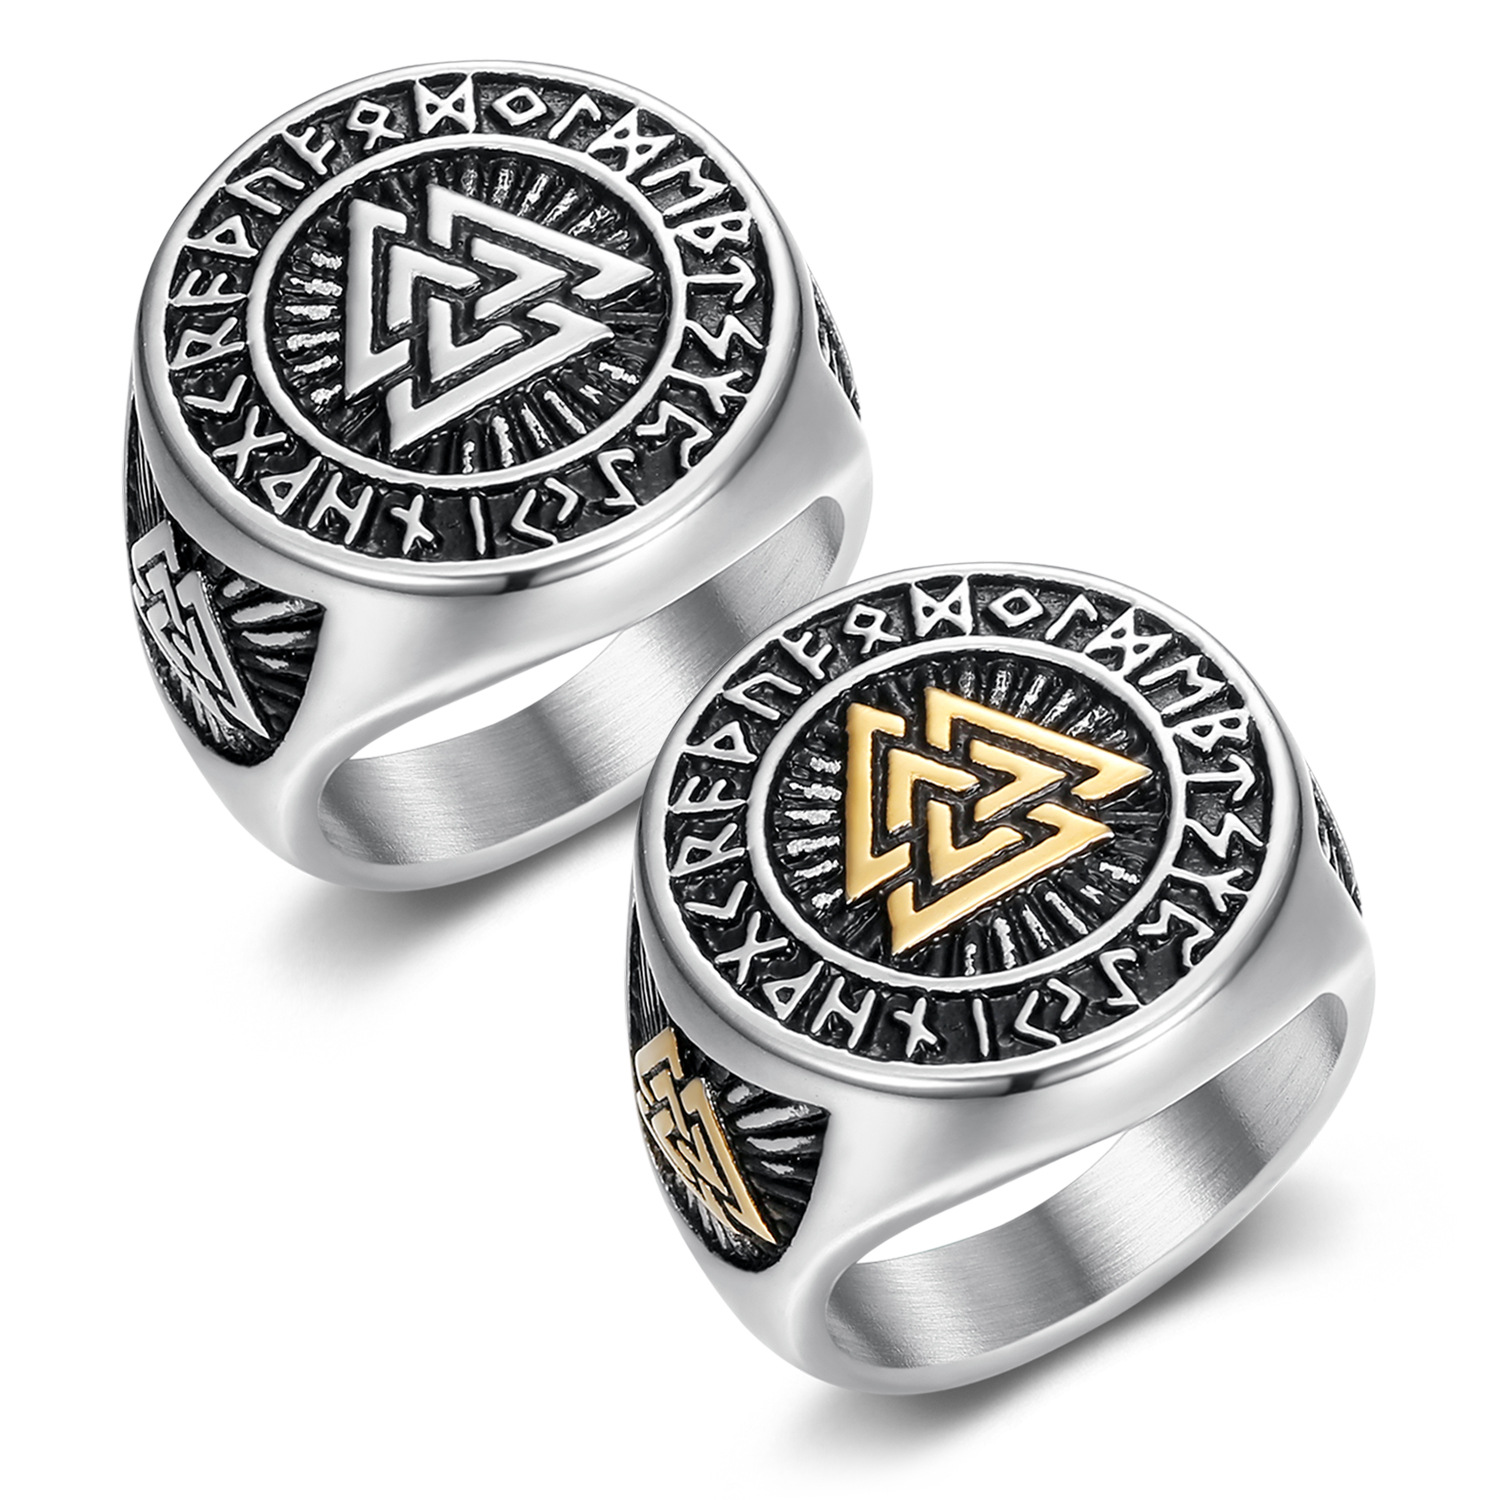 🔥 Last Day 49% OFF+Free Golden Necklace+Gift Box🔥 3rd Free,Add 3rd To Cart Auto Discount 🔥Hip Hop Viking Ring